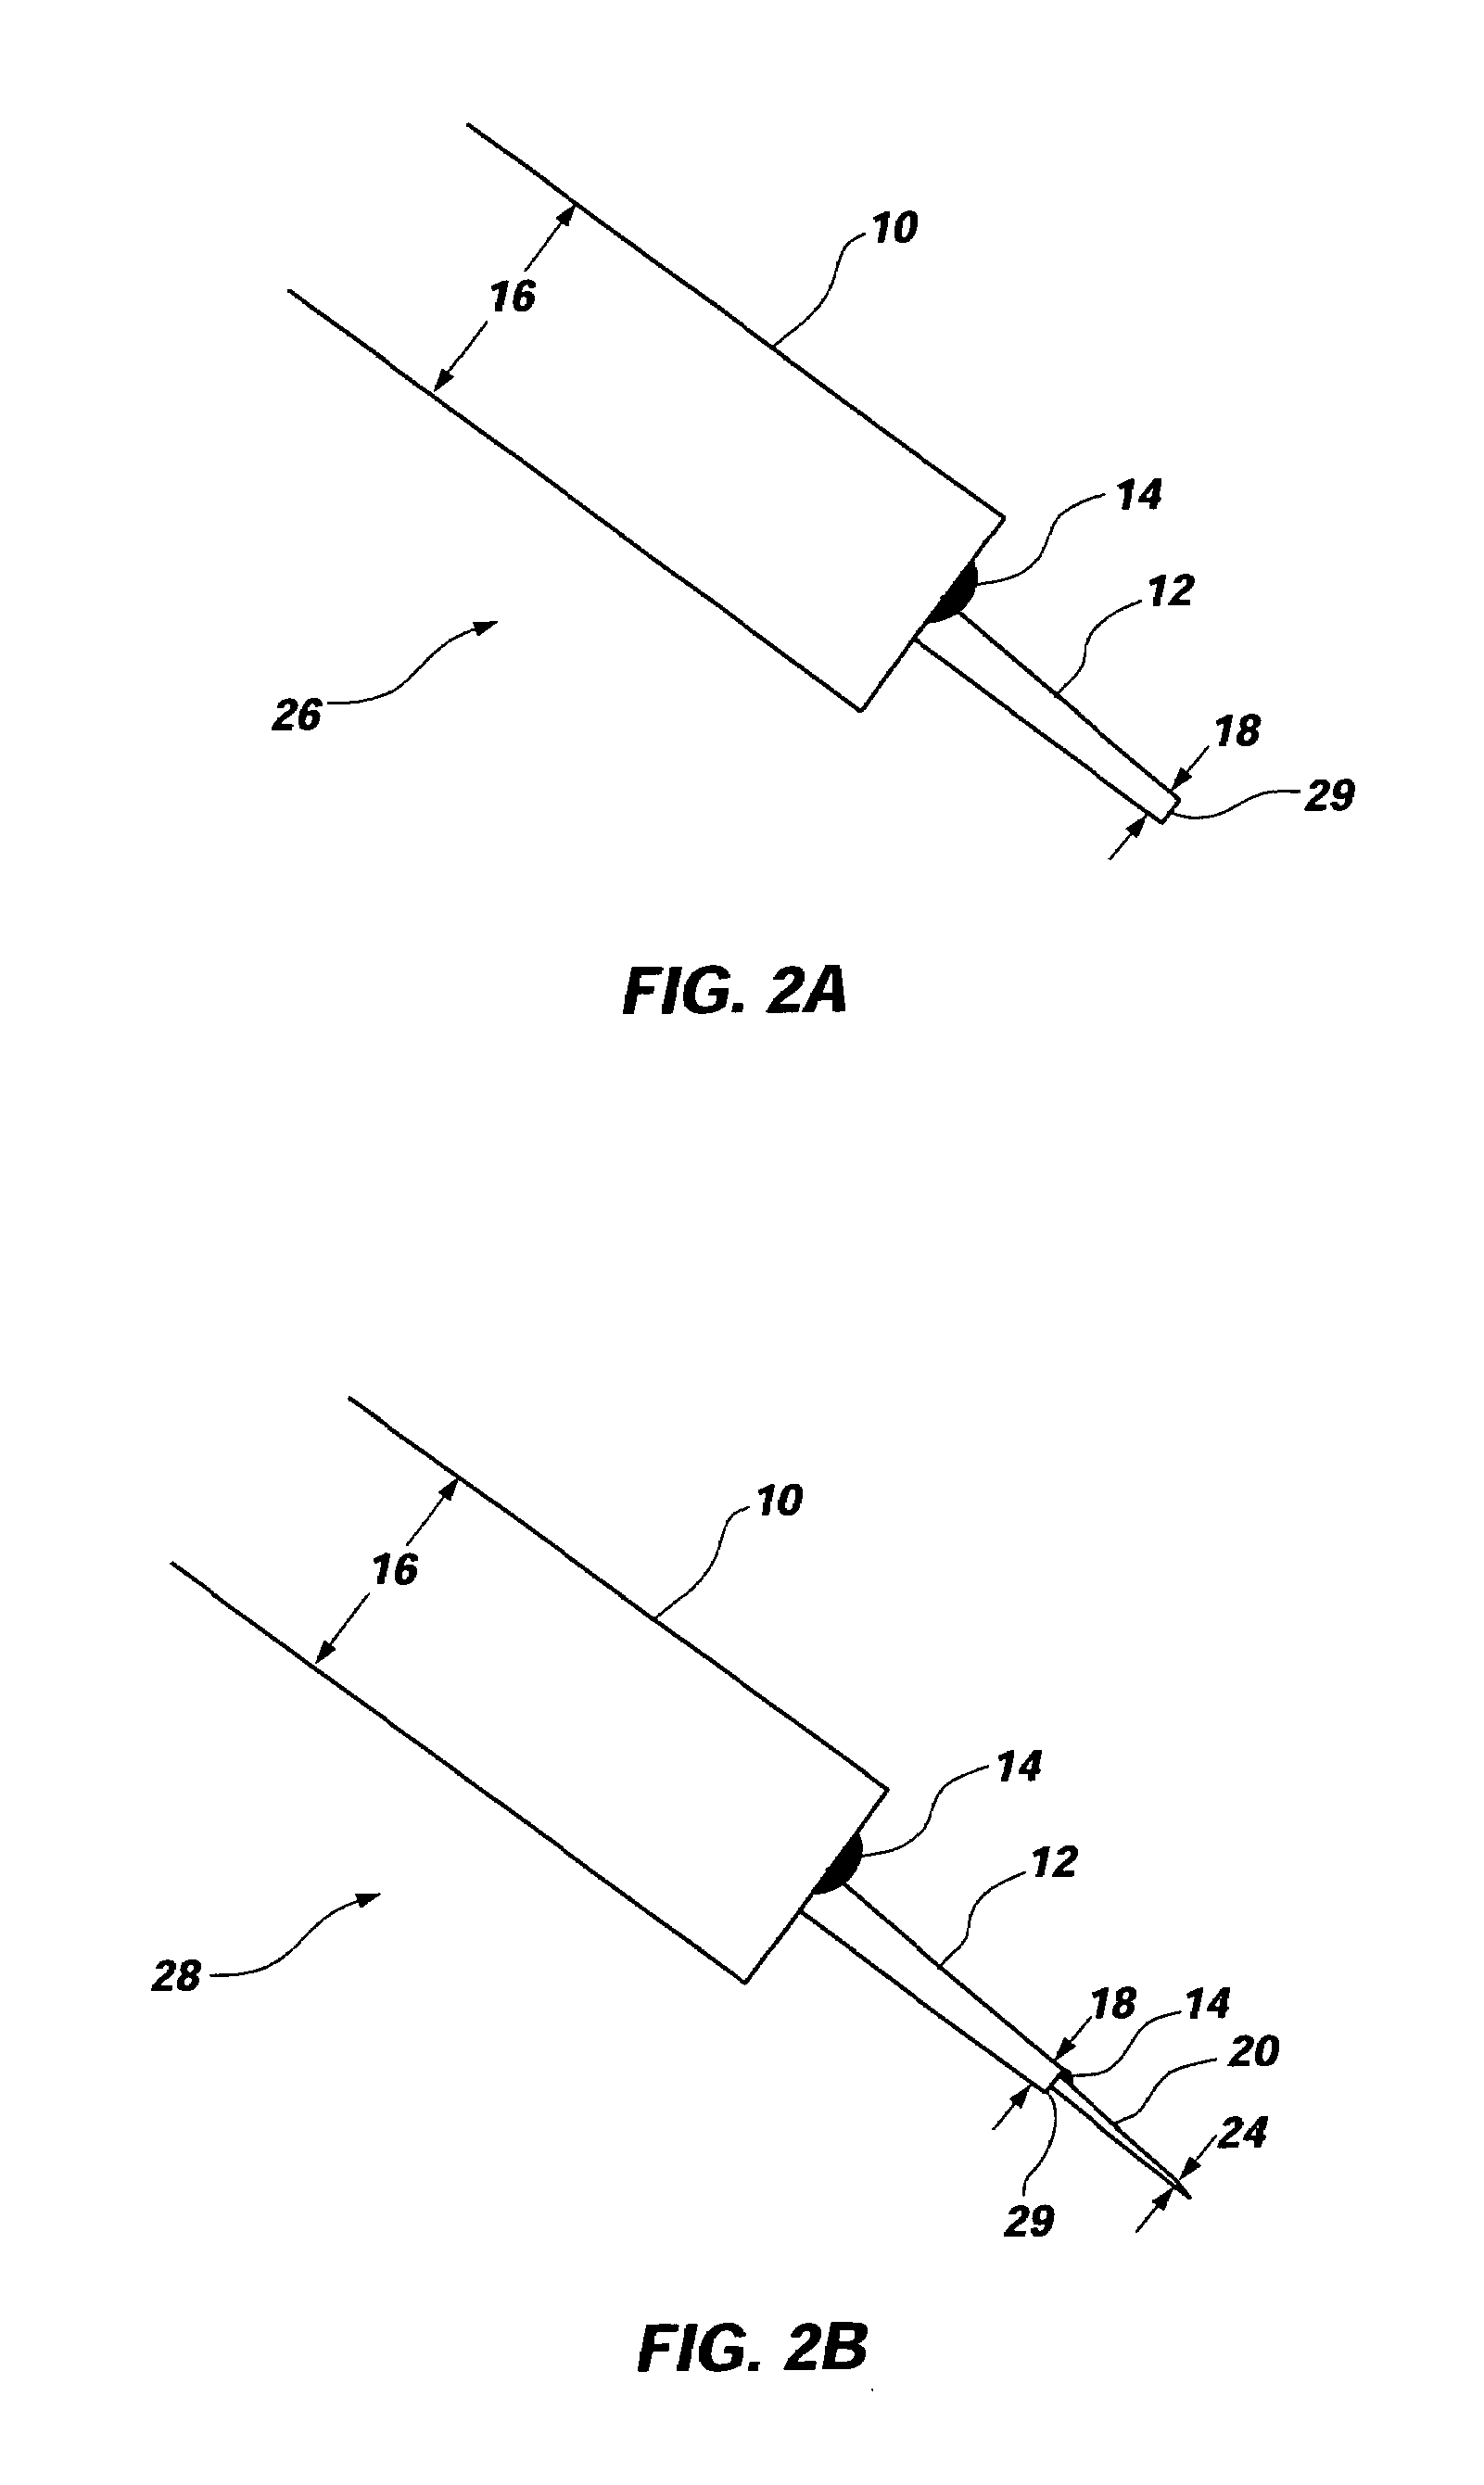 Lift-out probe having an extension tip, methods of making and using, and analytical instruments employing same